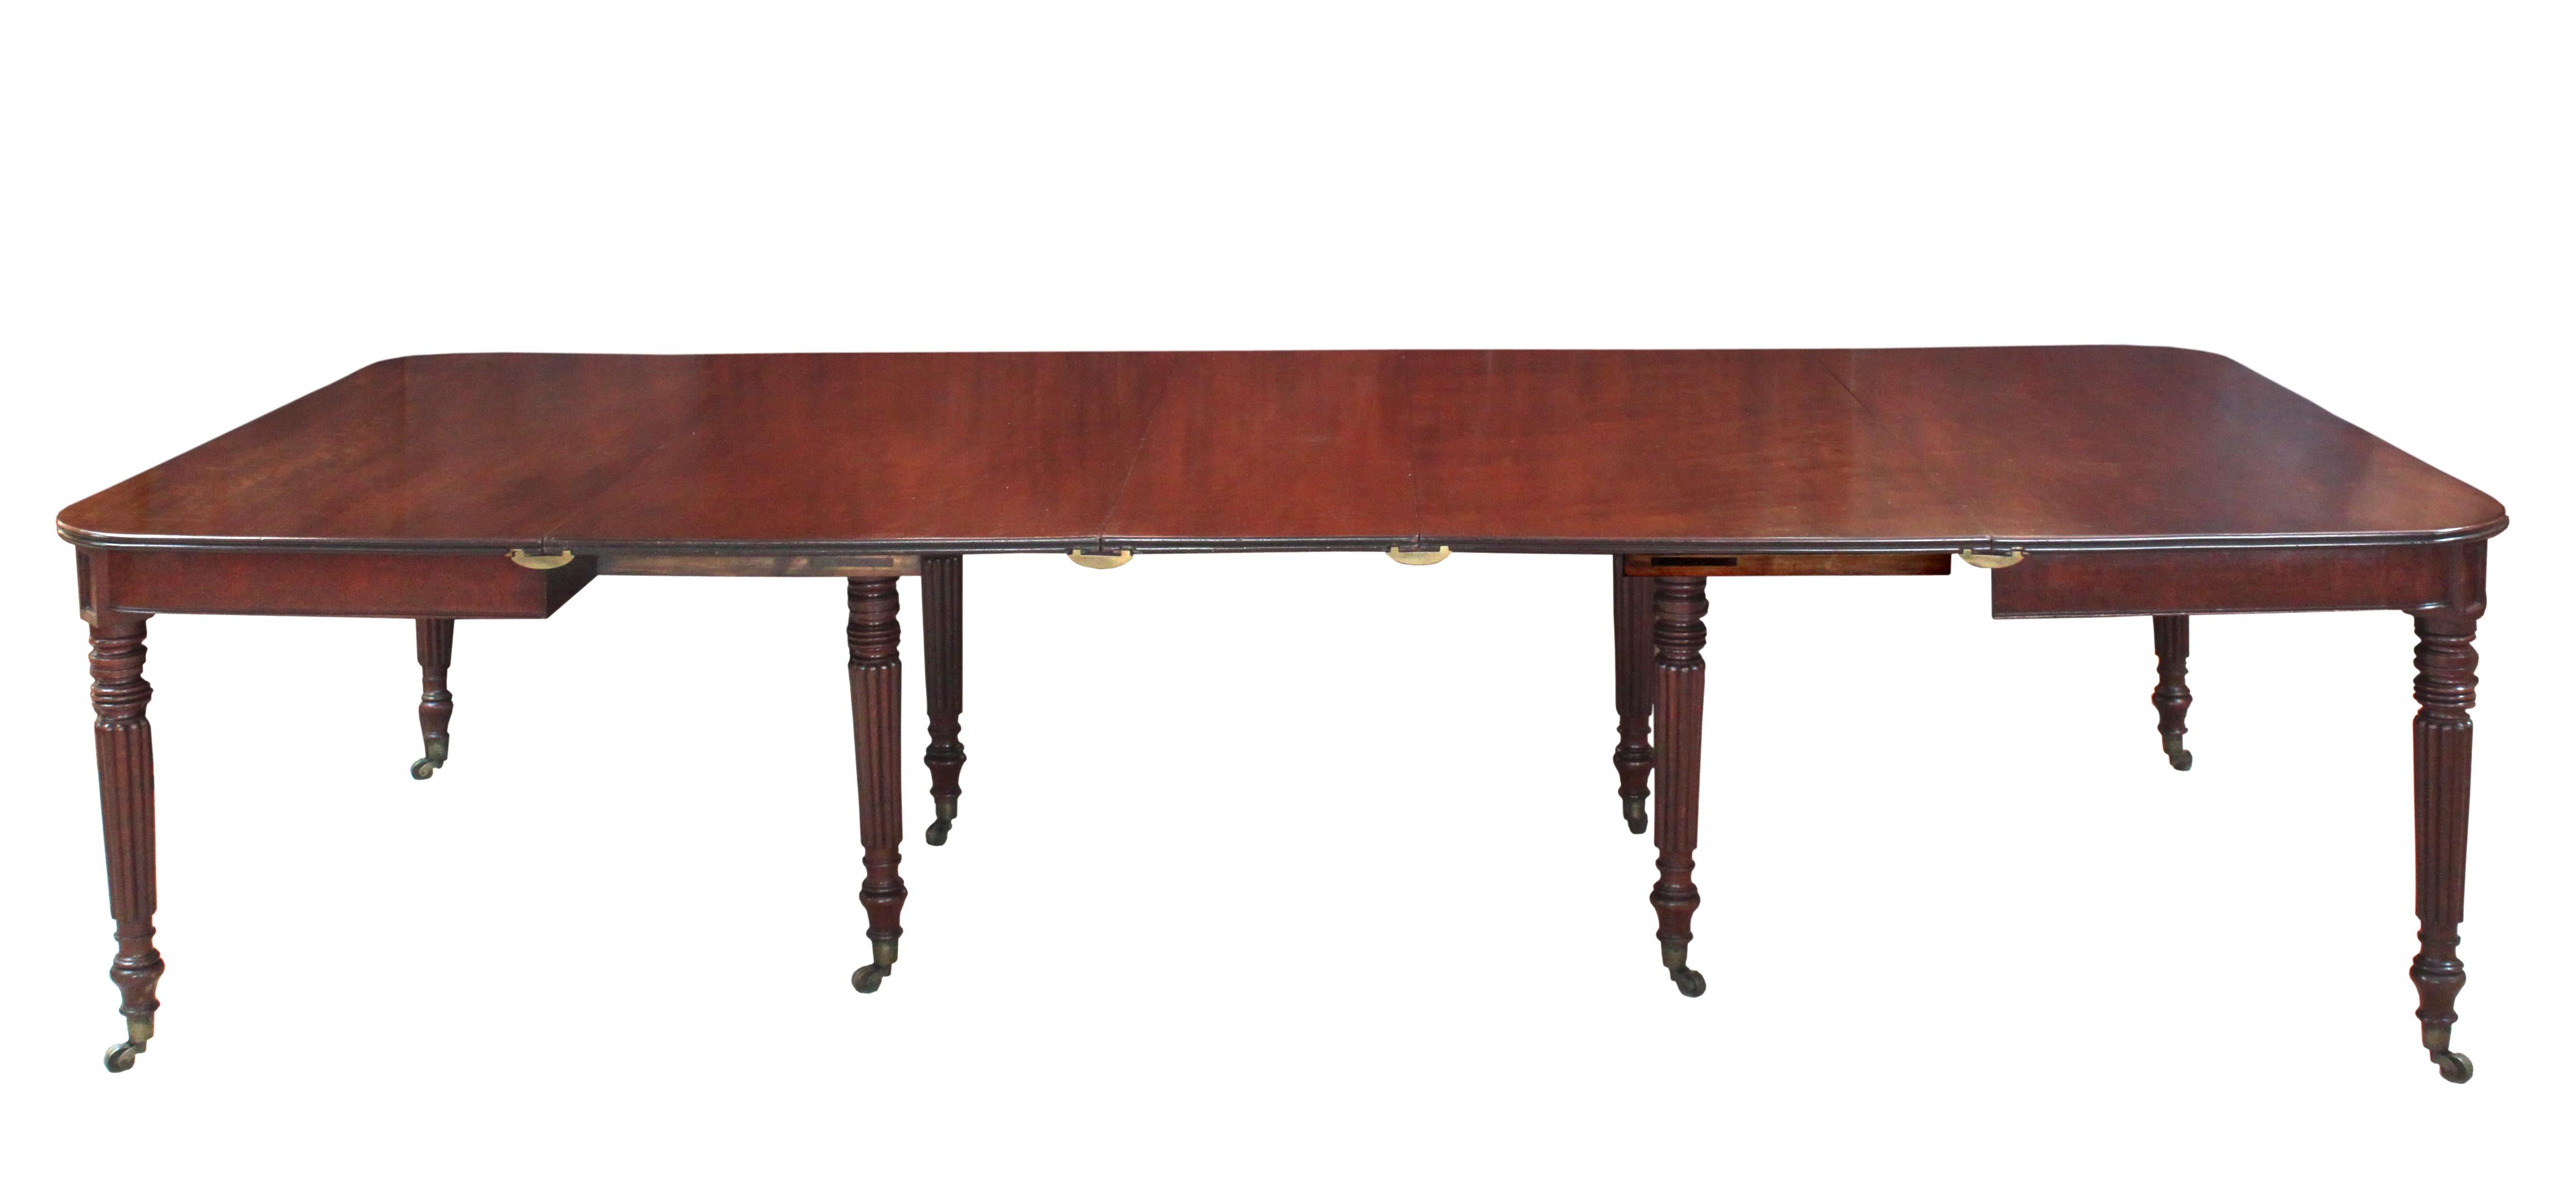 A fine Regency mahogany dining table attributed to Gillows of Lancaster: good model with shallow frieze, rectangular tablets at the top of the legs, elegant slim turned and reeded legs with brass castors and oak extending action with compartment to